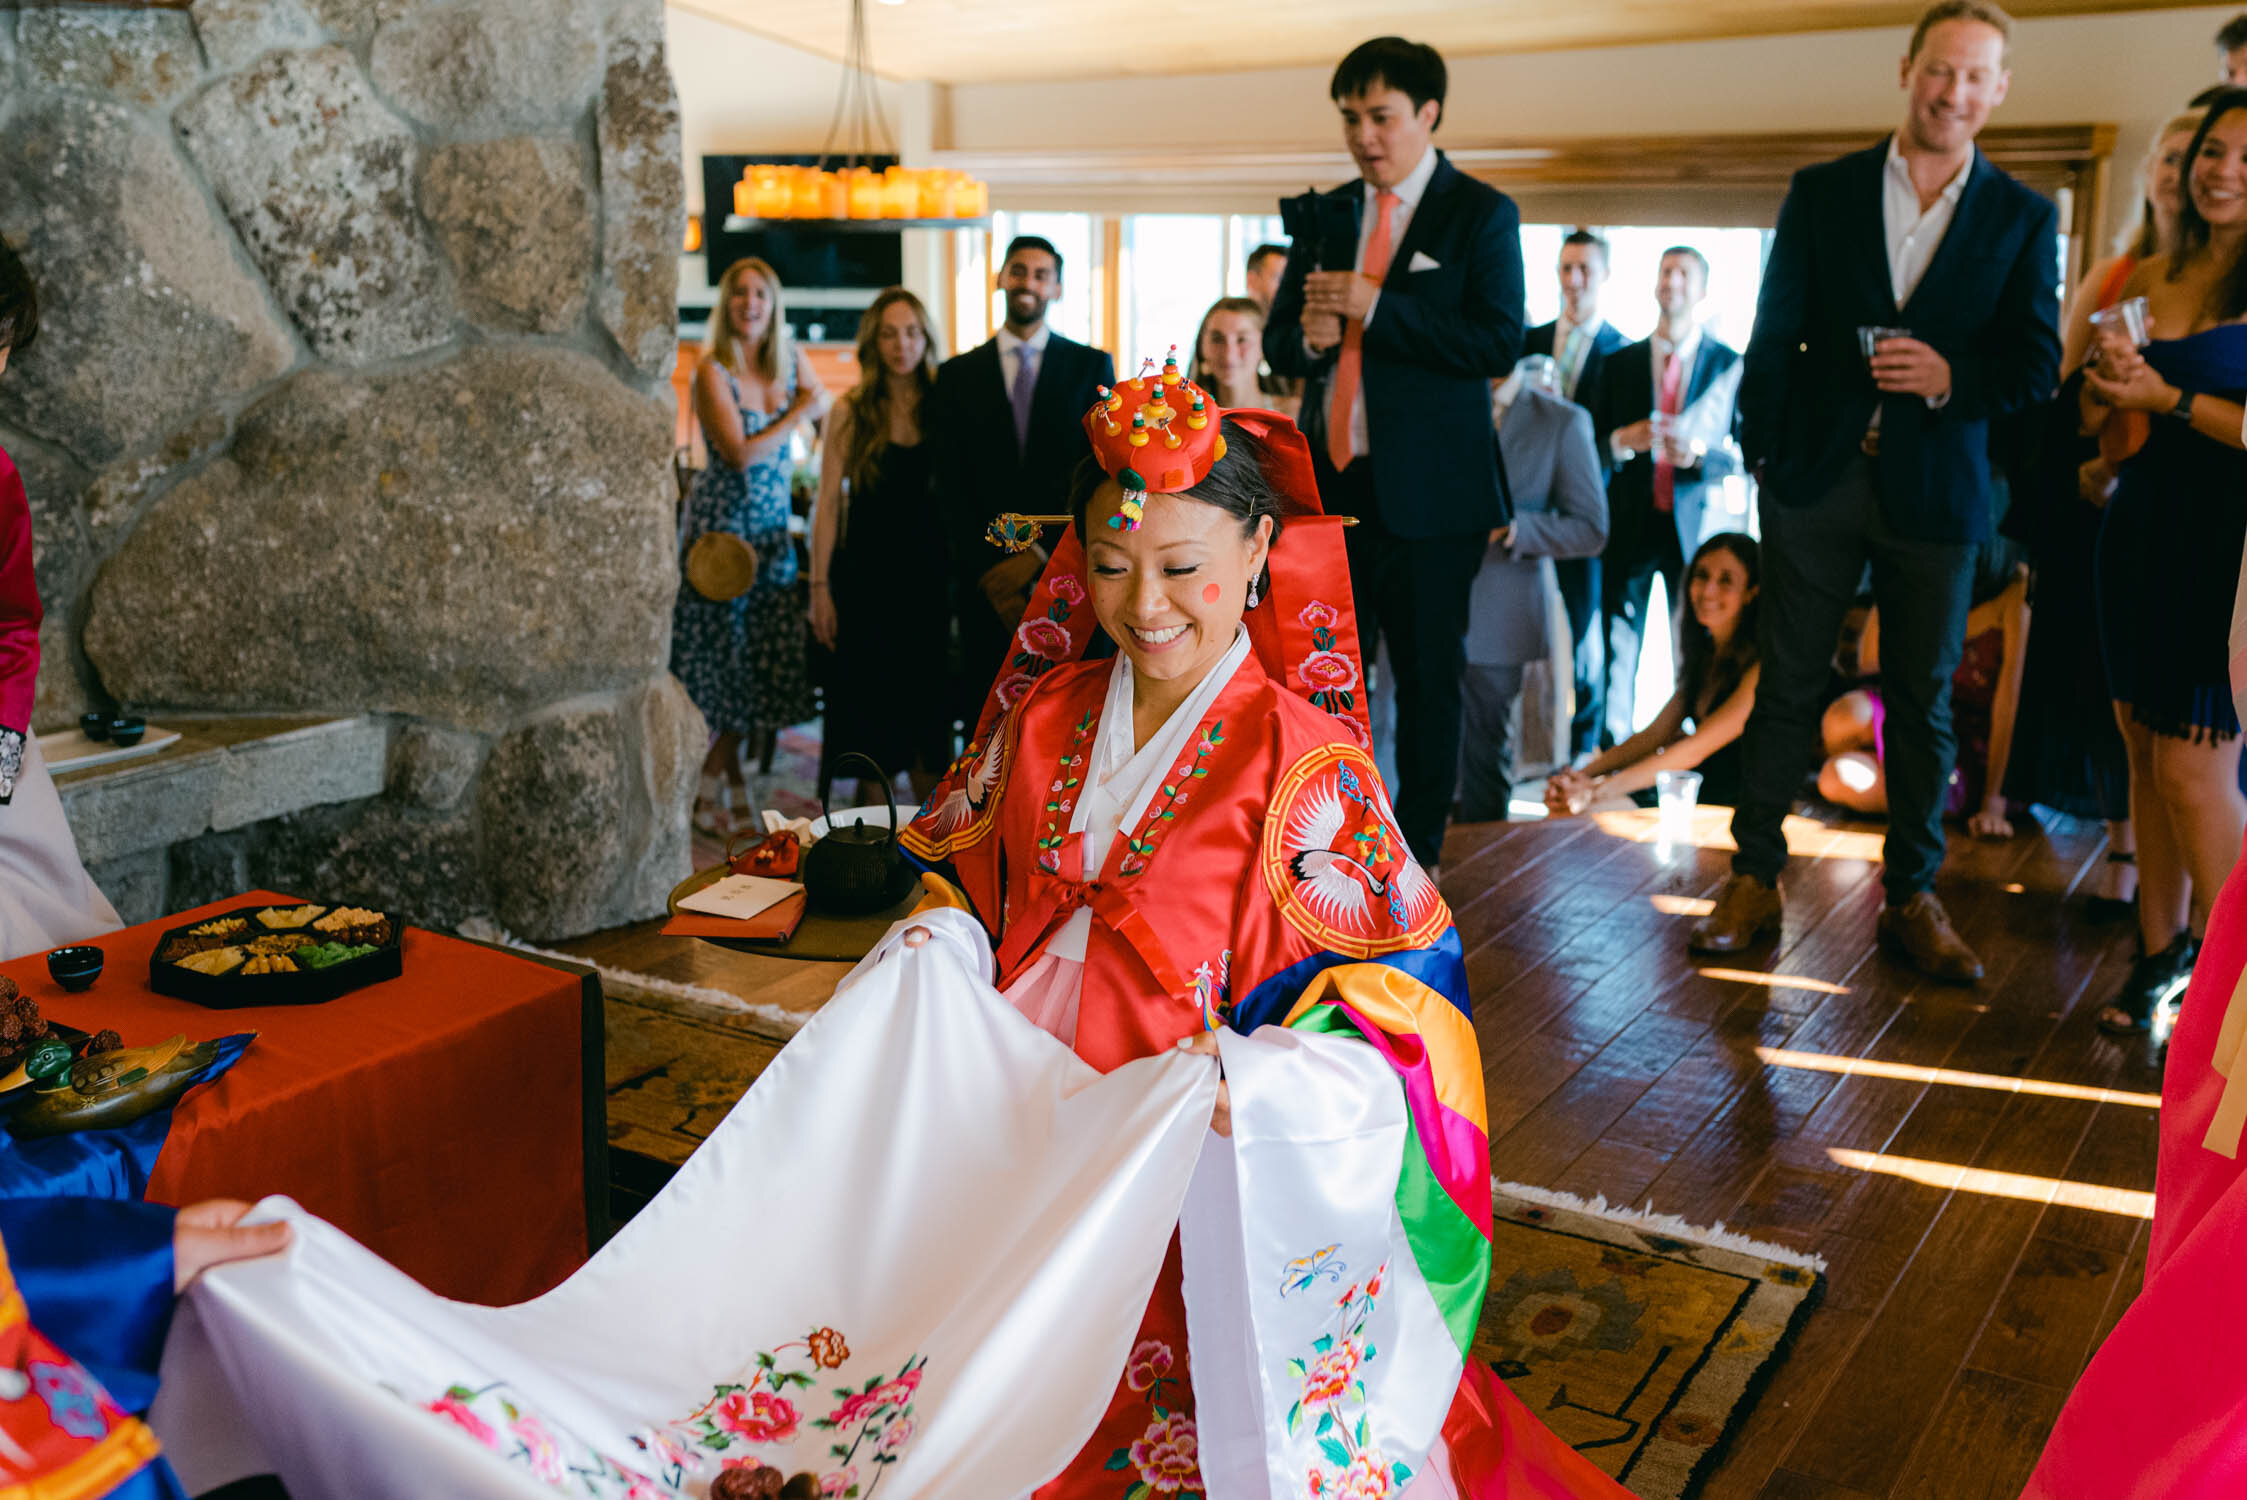 Tahoe Blue Estate Wedding, photo of the Korean and Chinese wedding ceremony details